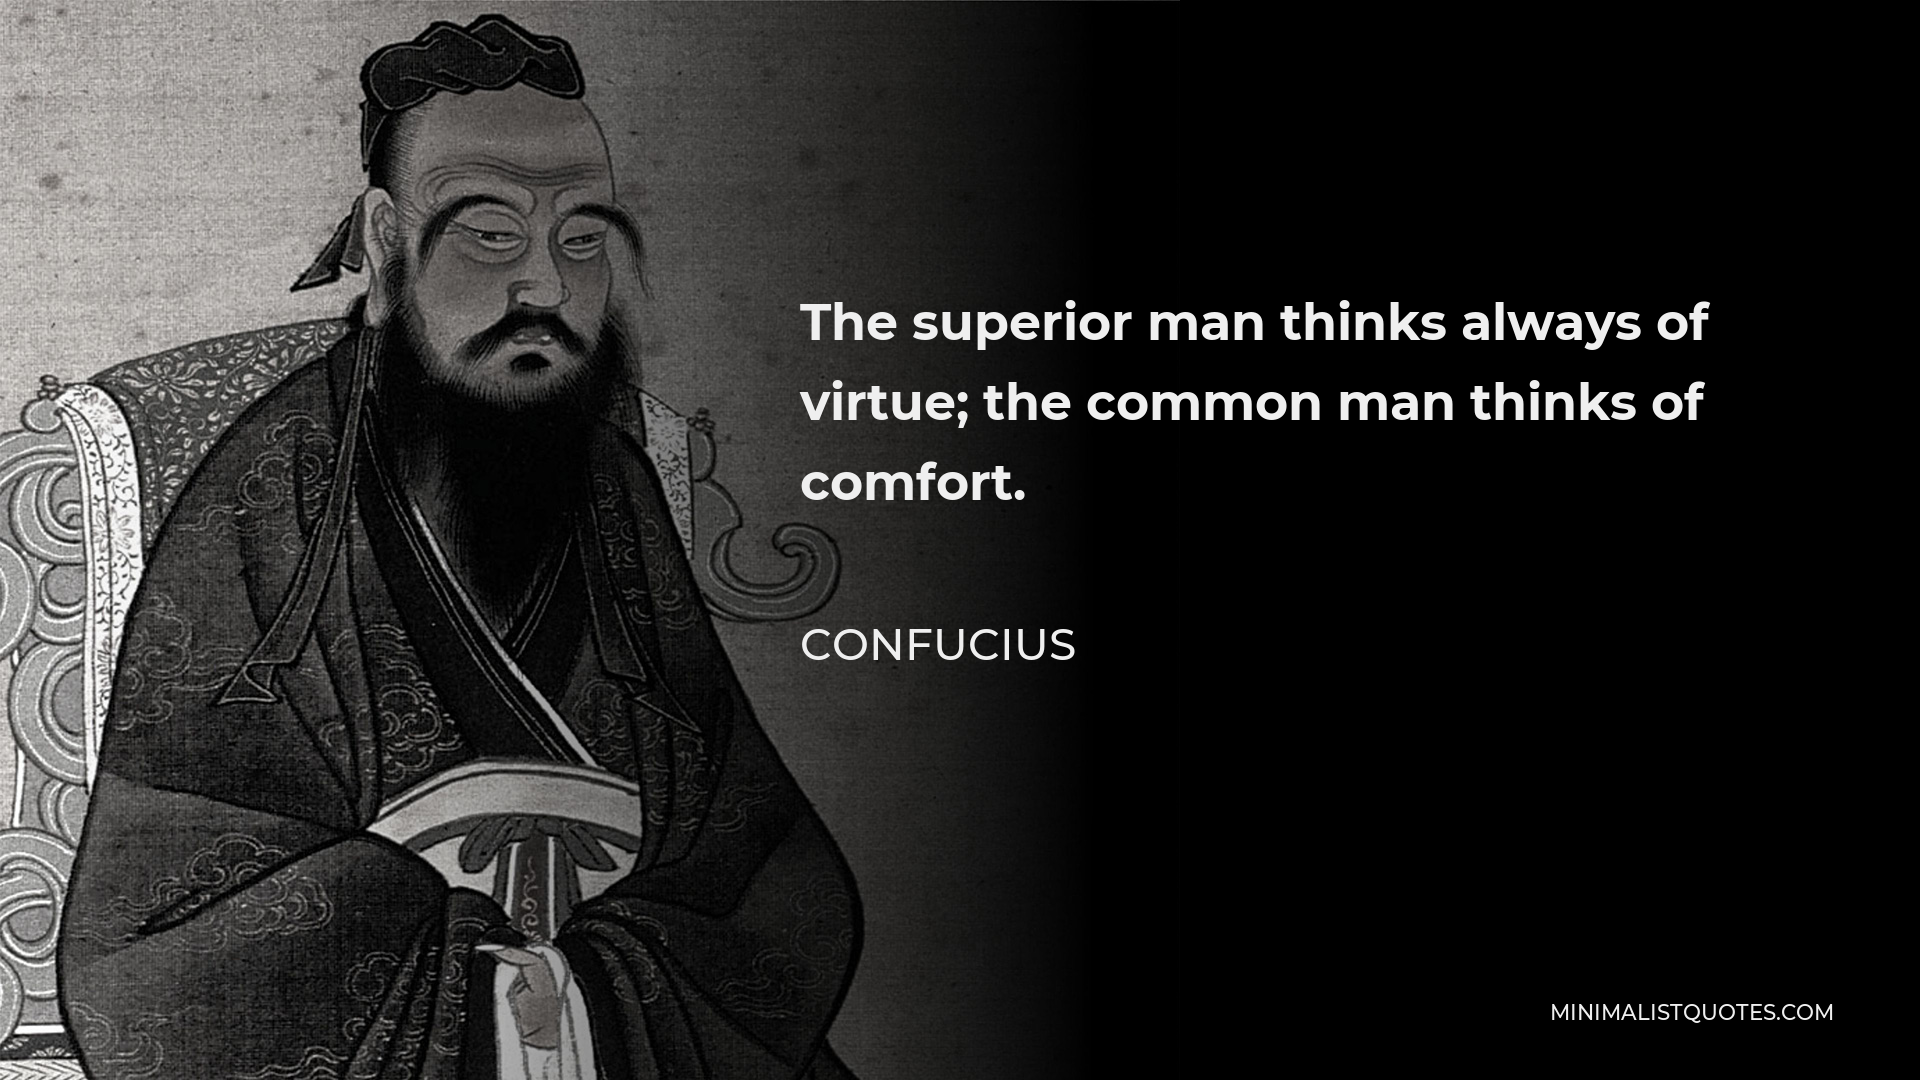 Confucius Quote - The superior man thinks always of virtue; the common man thinks of comfort.